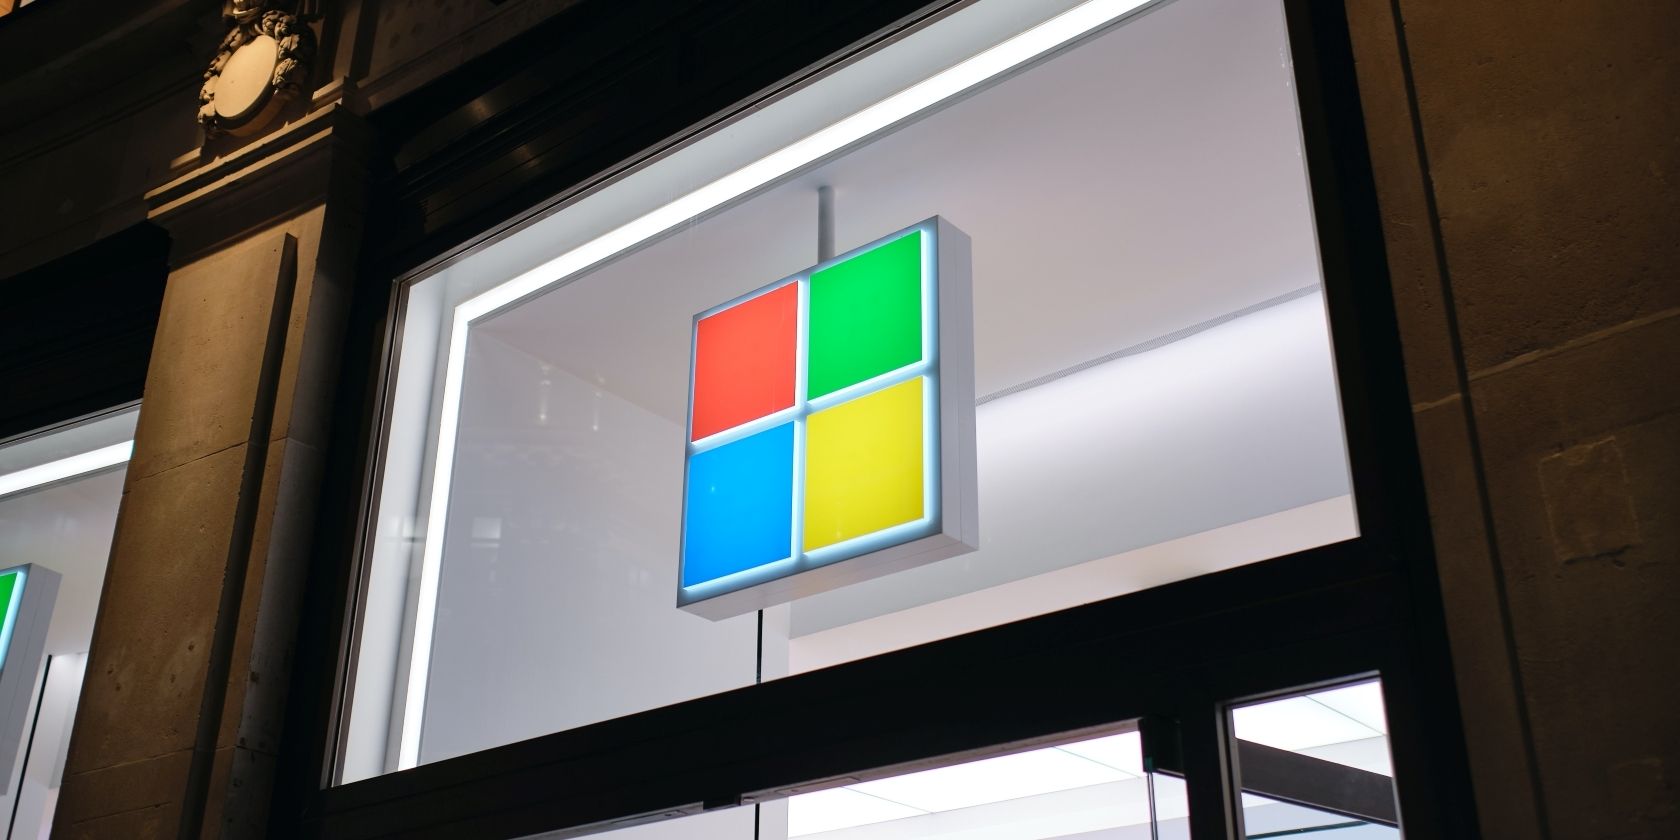 A photograph of the Microsoft logo displayed on the window of a building